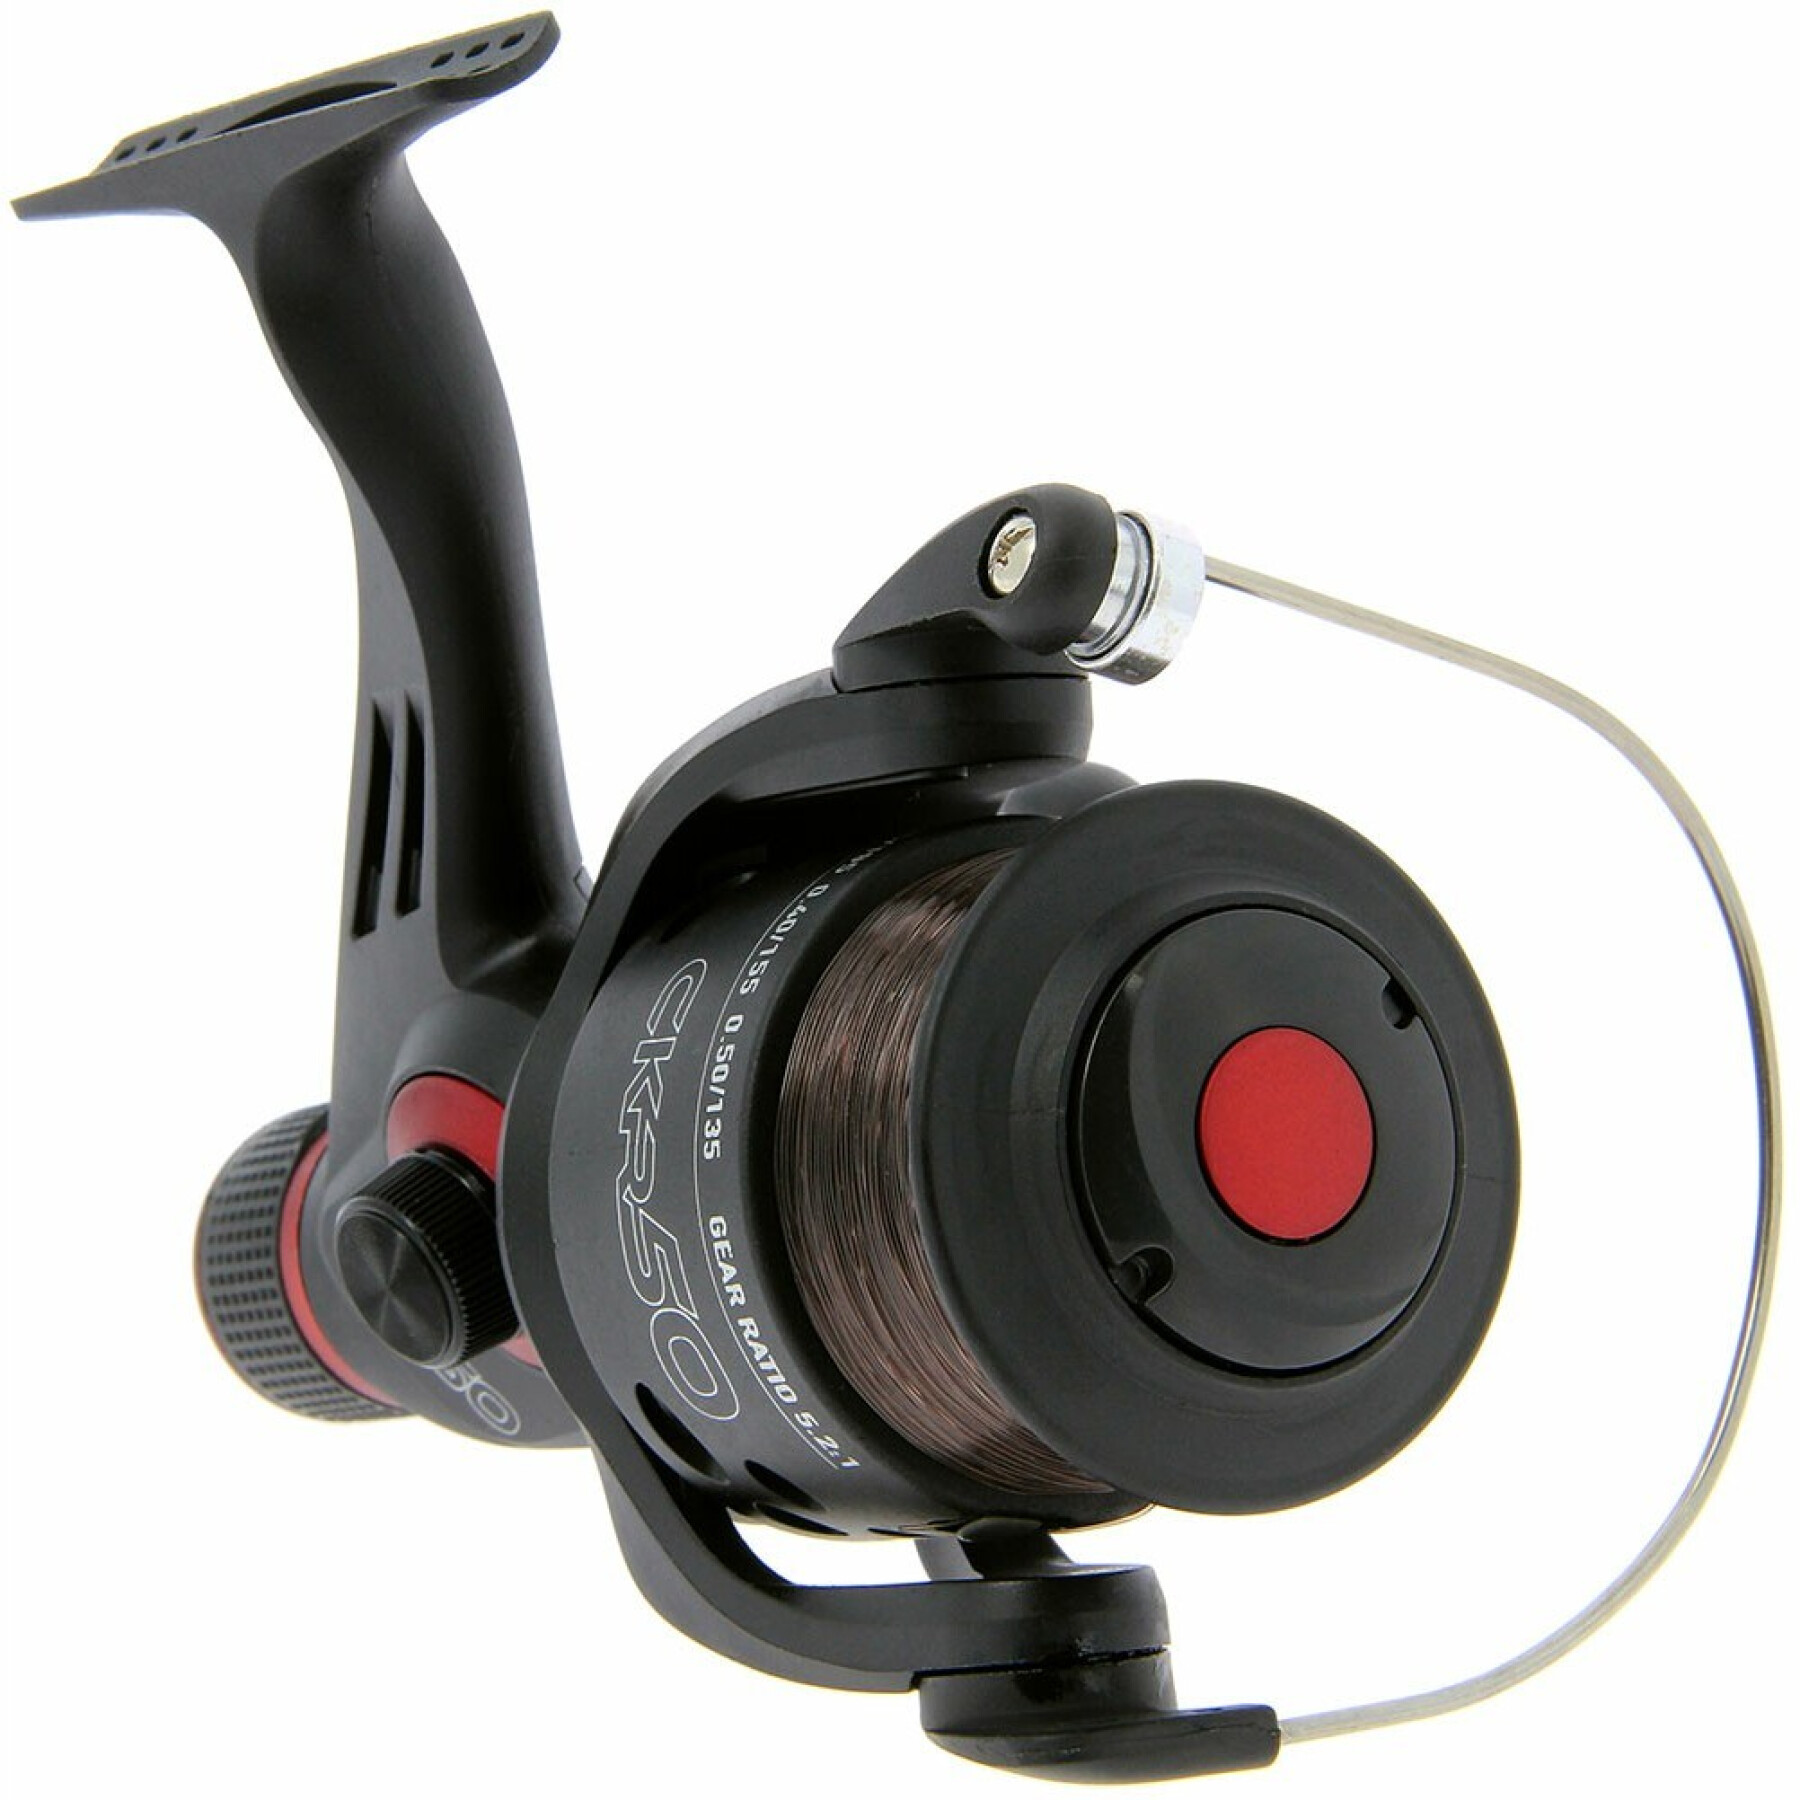 Angelrolle 1bb mit 8 lb Schnur Angling Pursuits CKR50